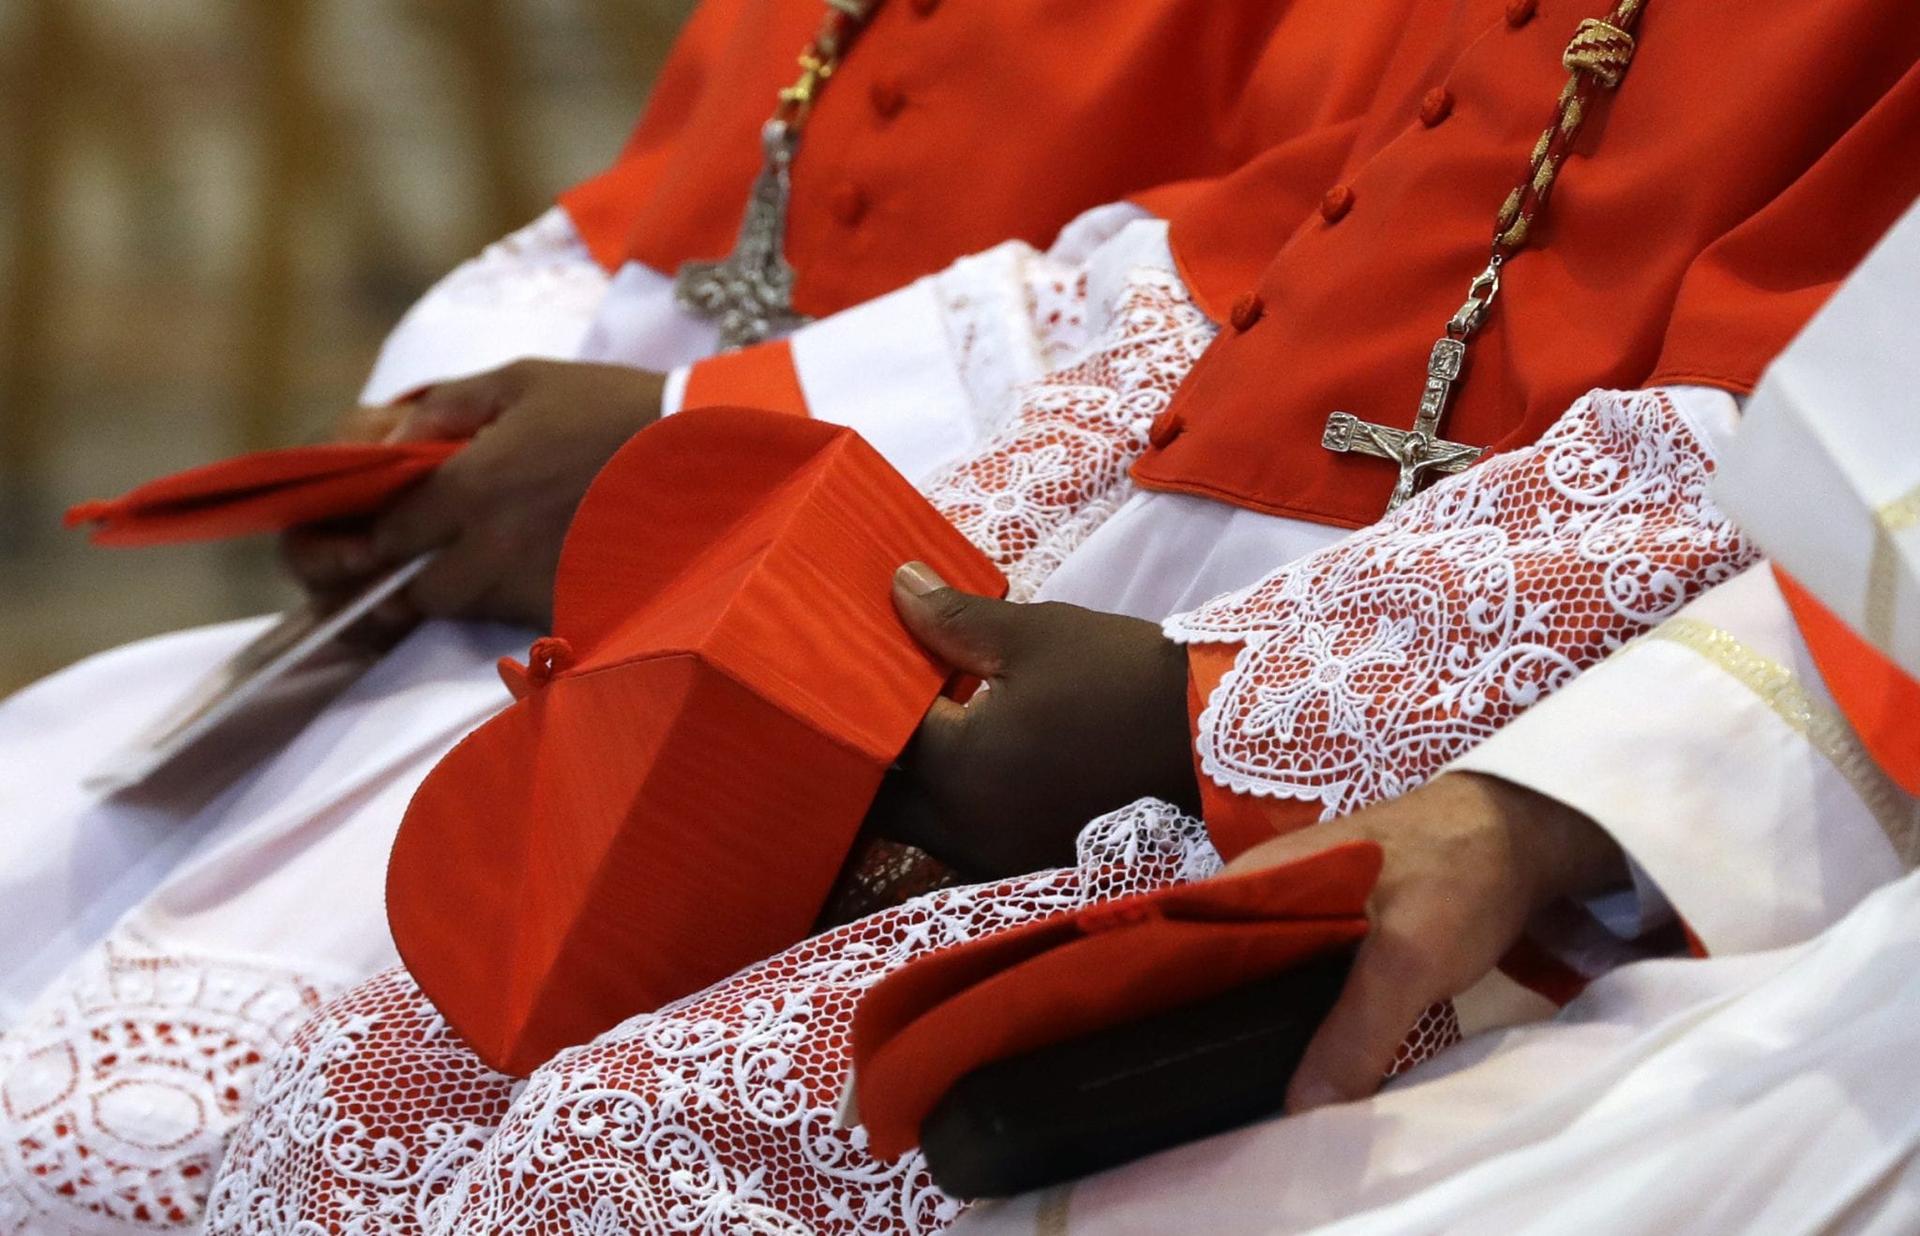 Three take-aways from today’s global crop of new cardinals